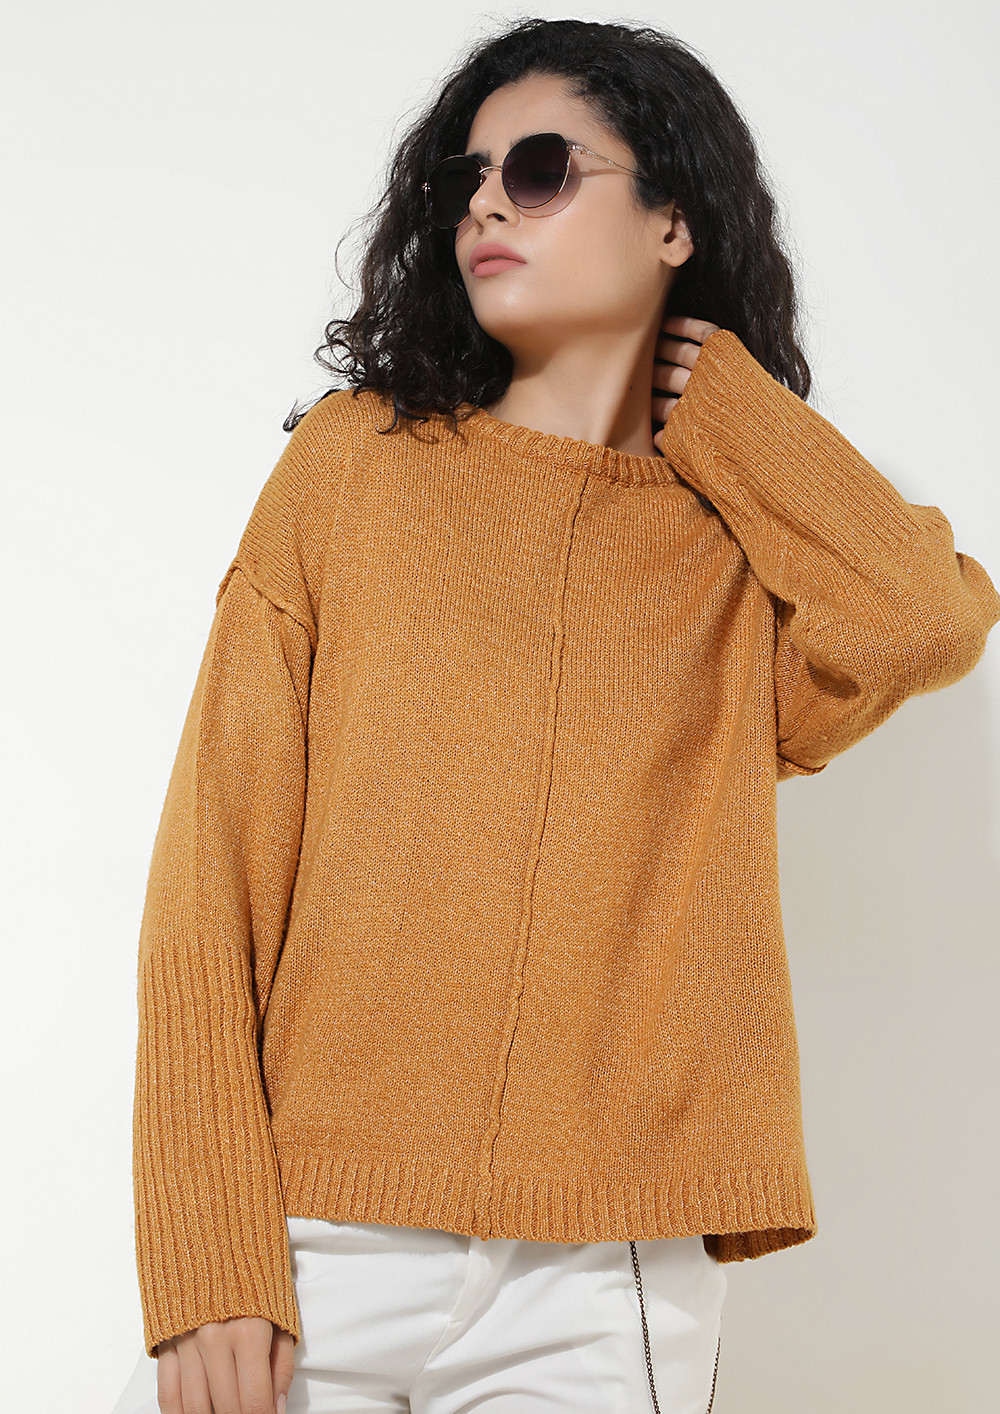 AGAINST THE COLD WIND MUSTARD JUMPER